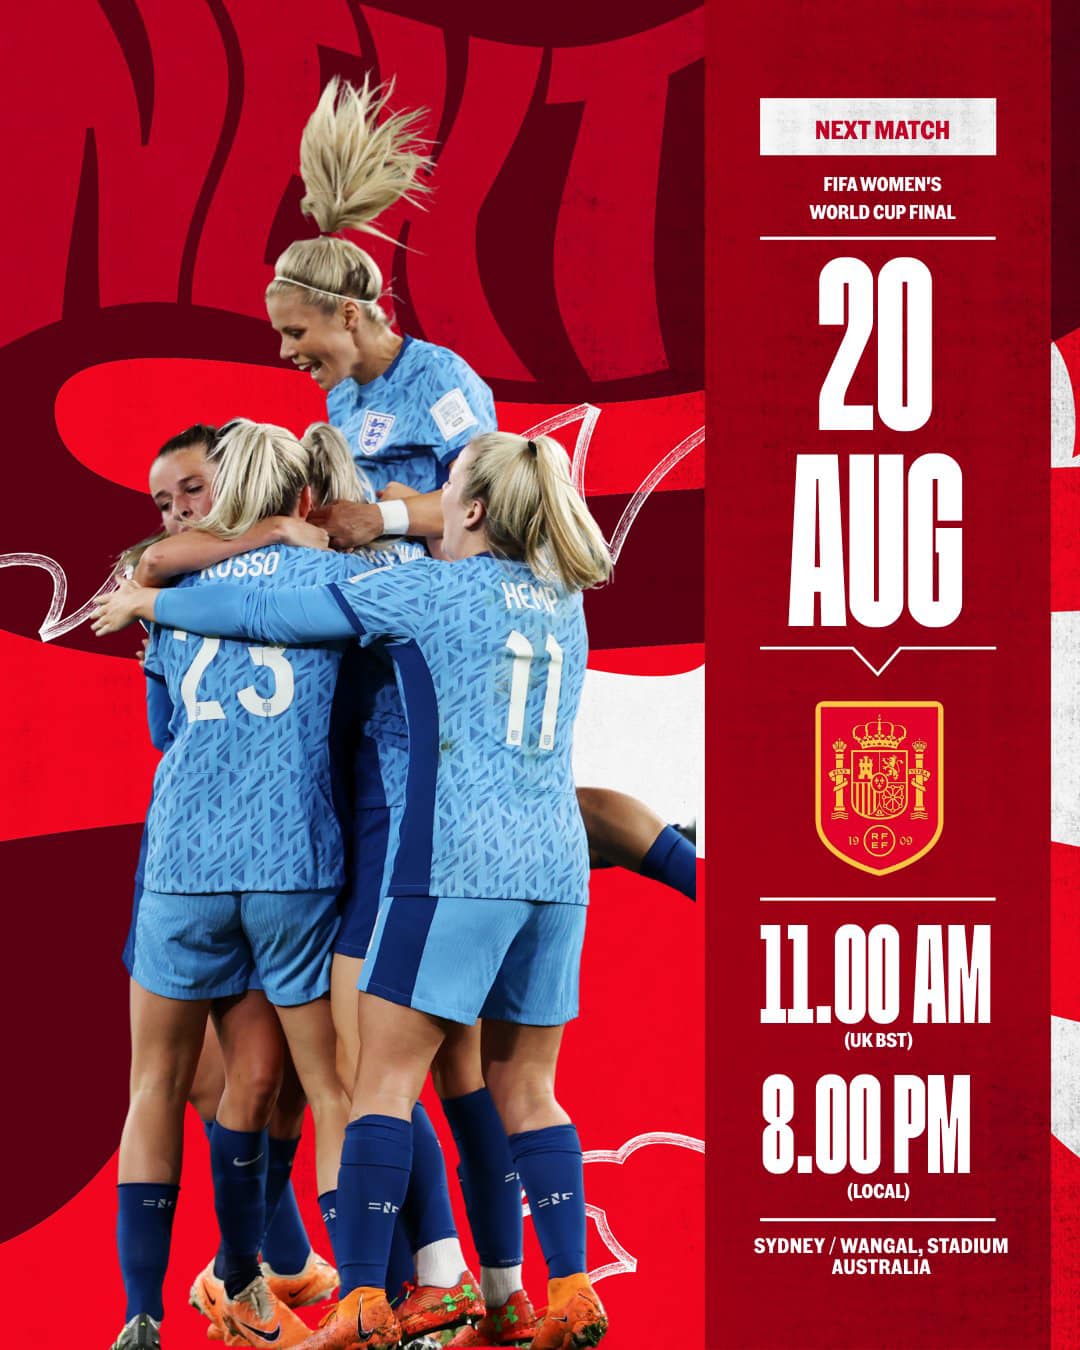 England are through to the Women's World Cup Final 2023